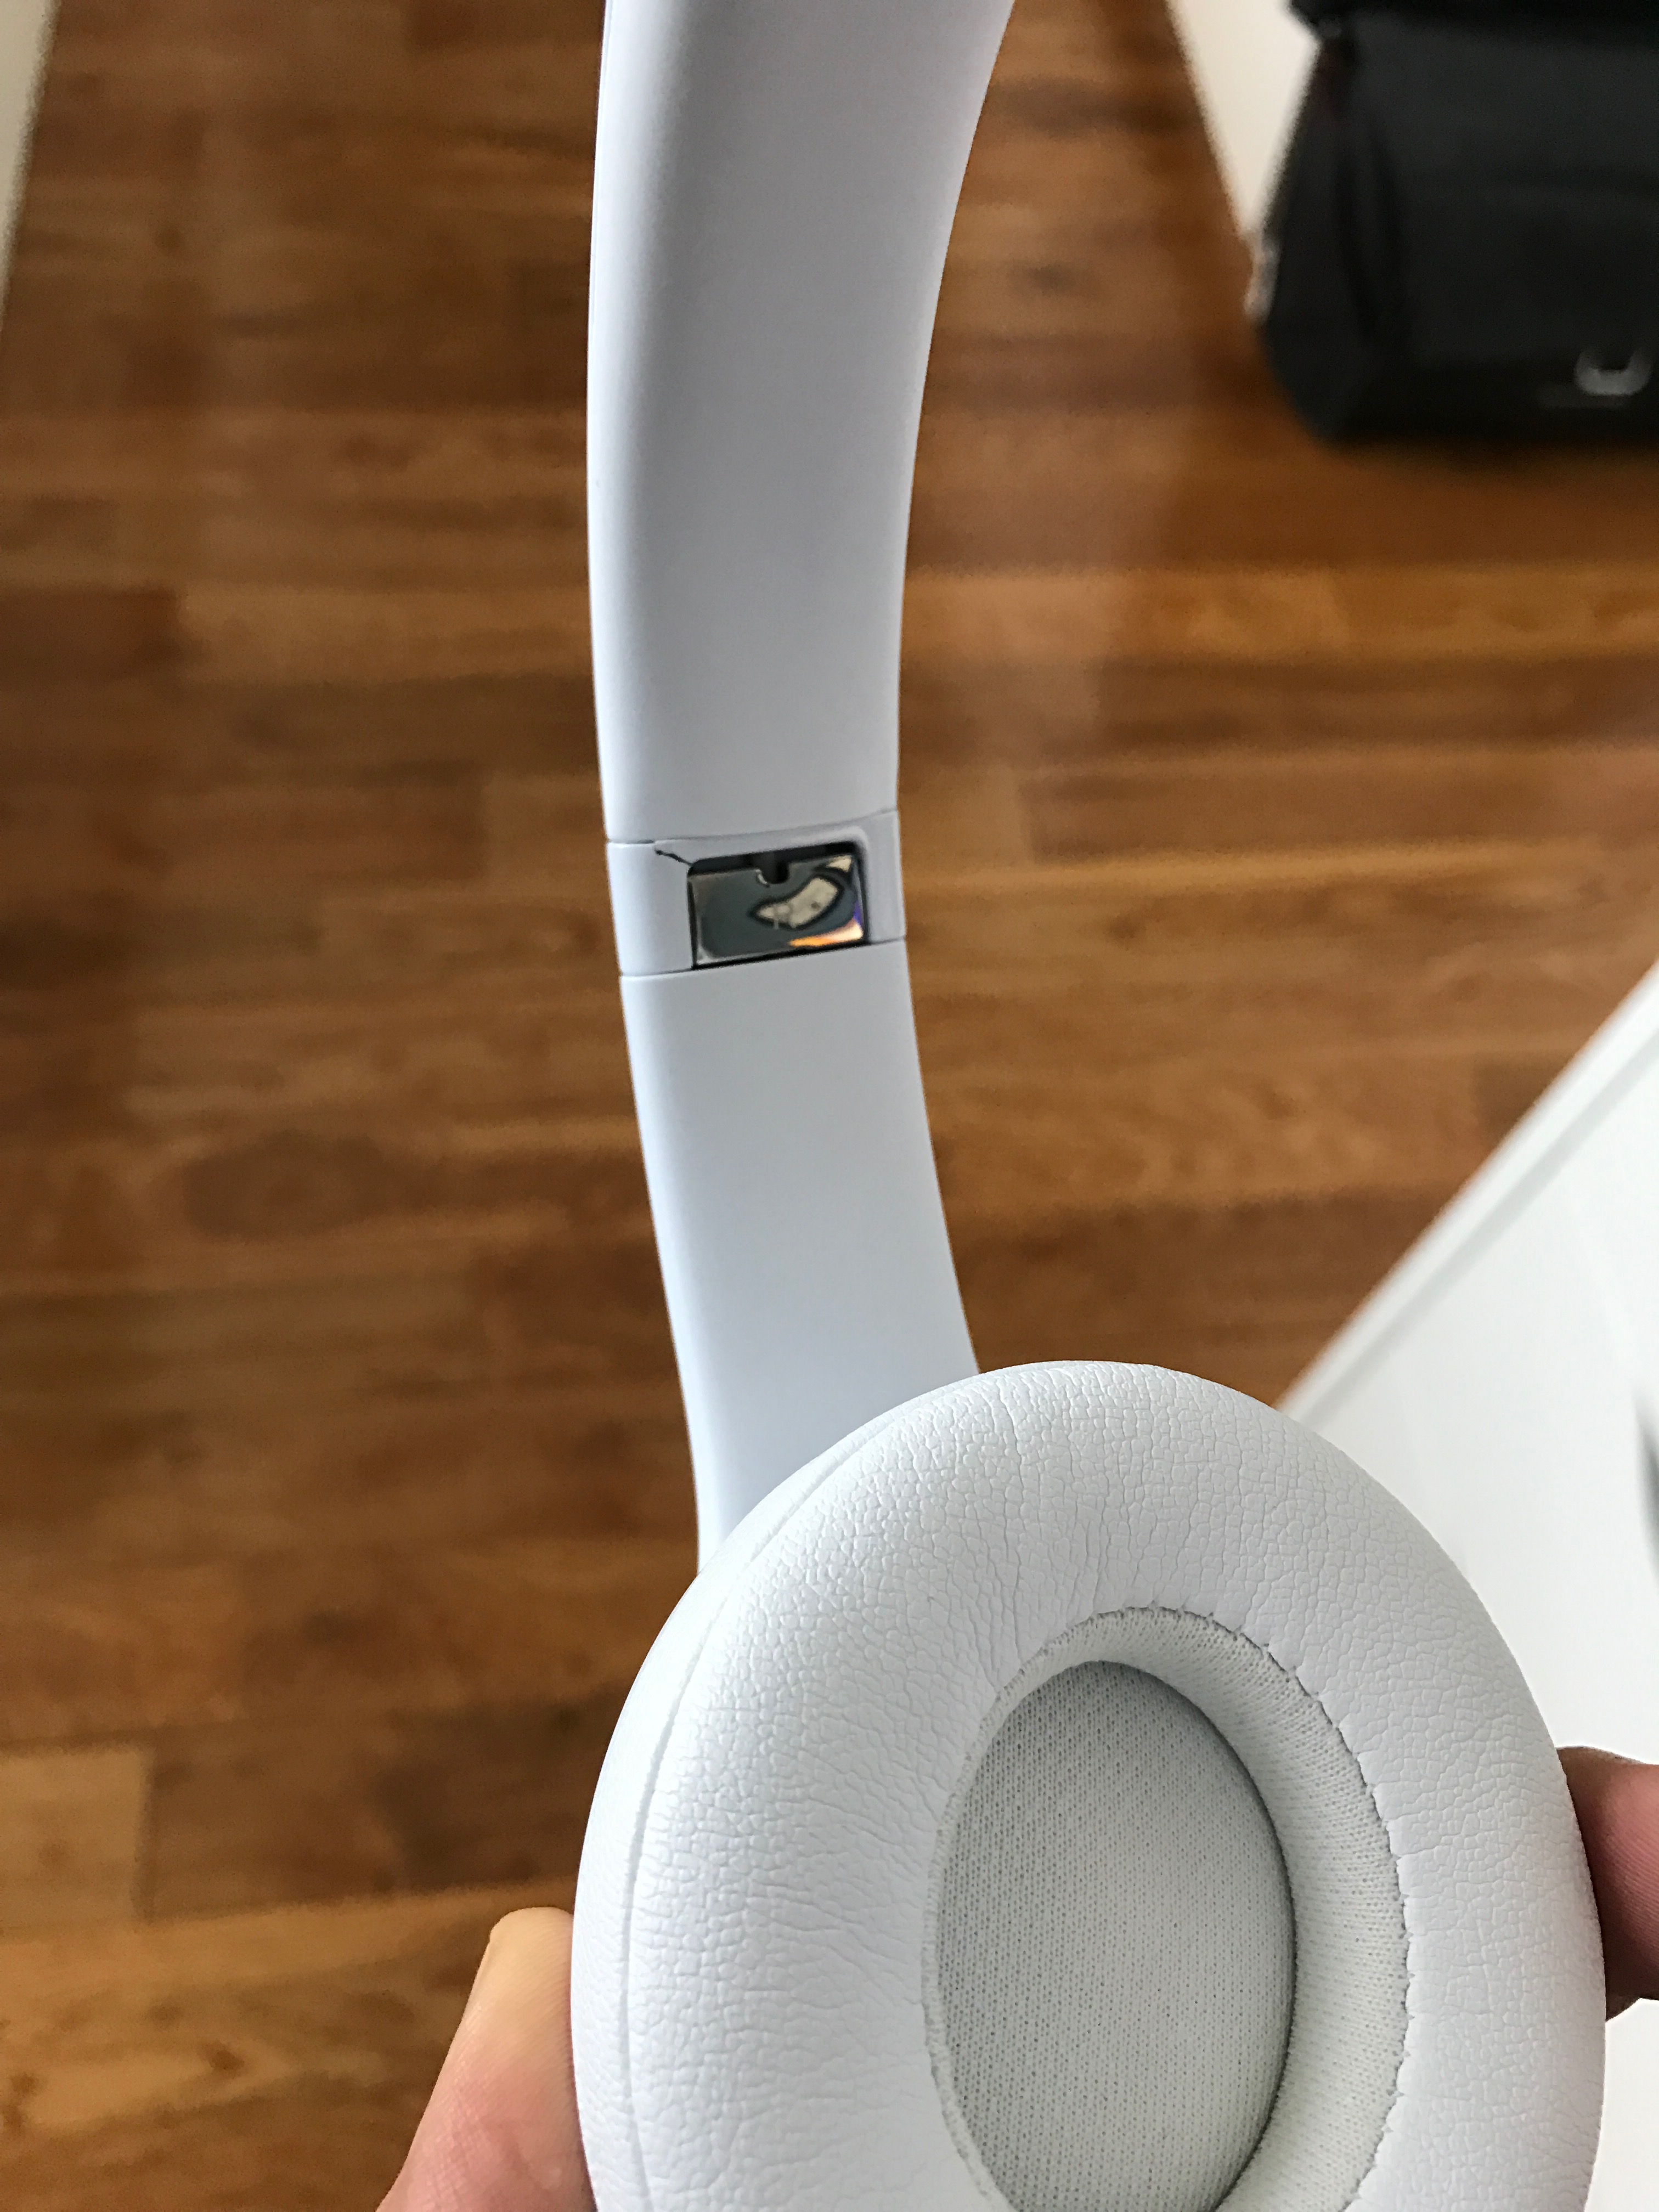 Beats Solo 3 Hinge Cracked Forums